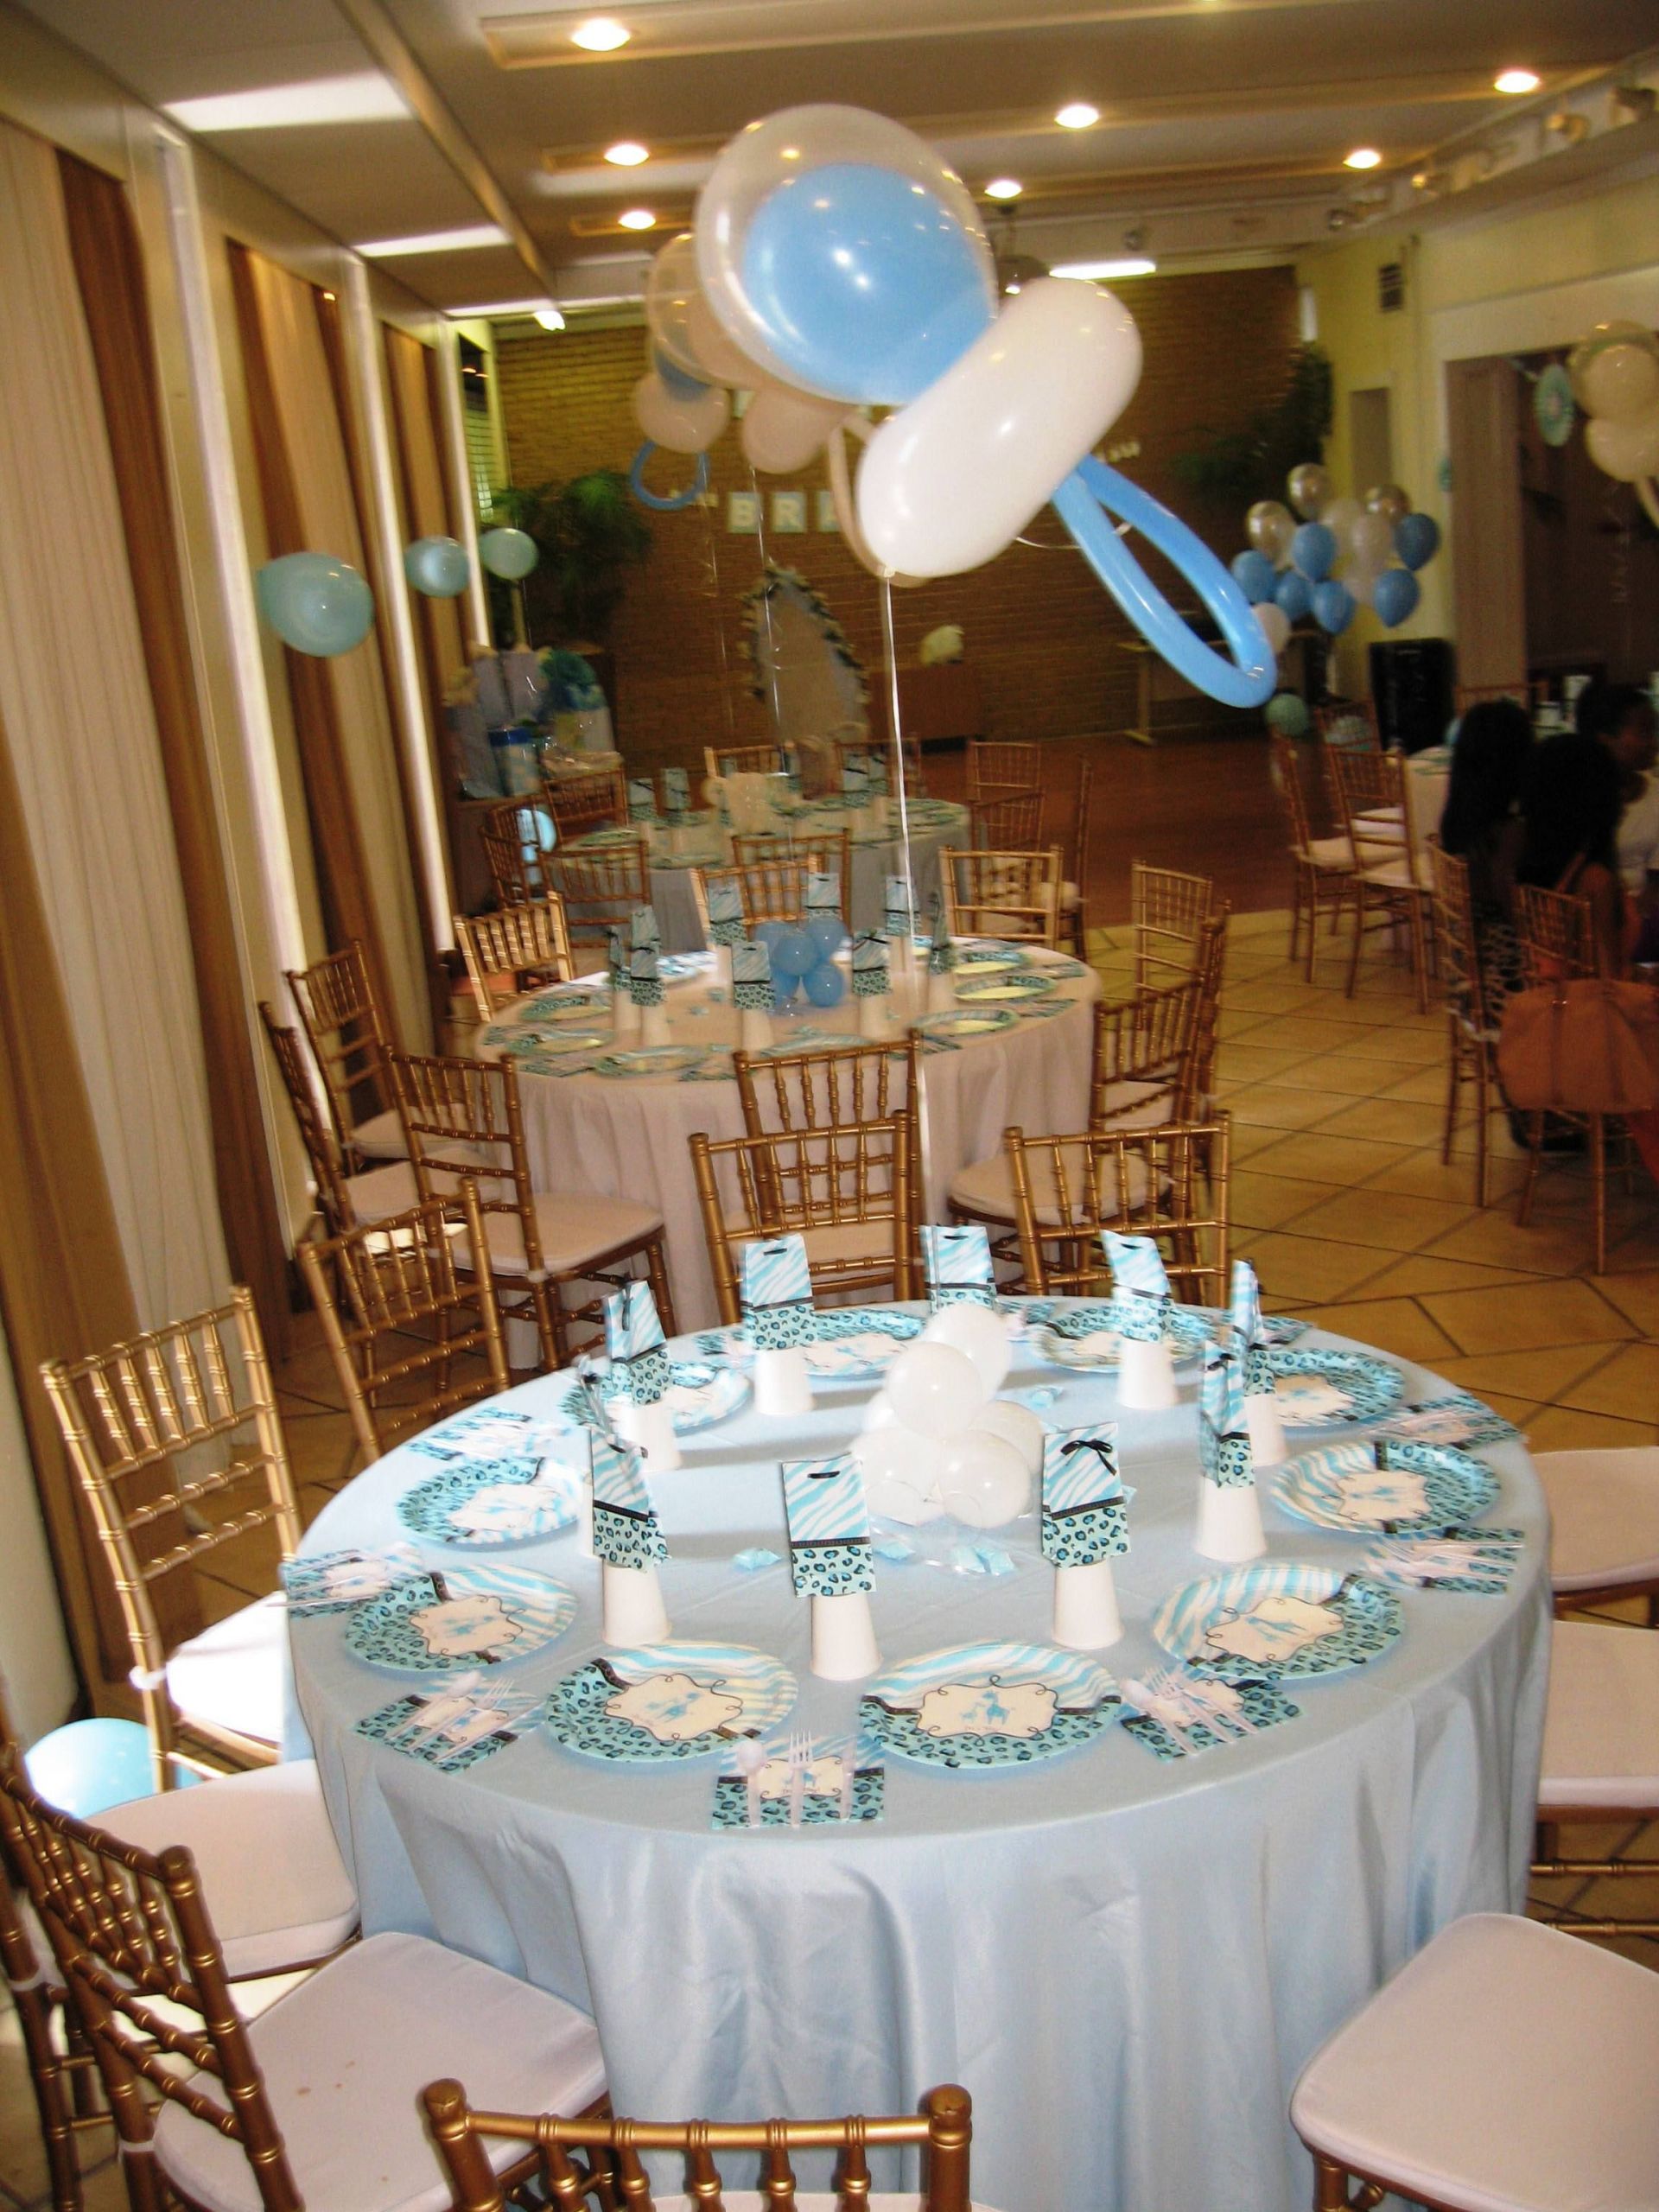 Baby Shower Decor Ideas For Tables
 Baby Shower Table Decor